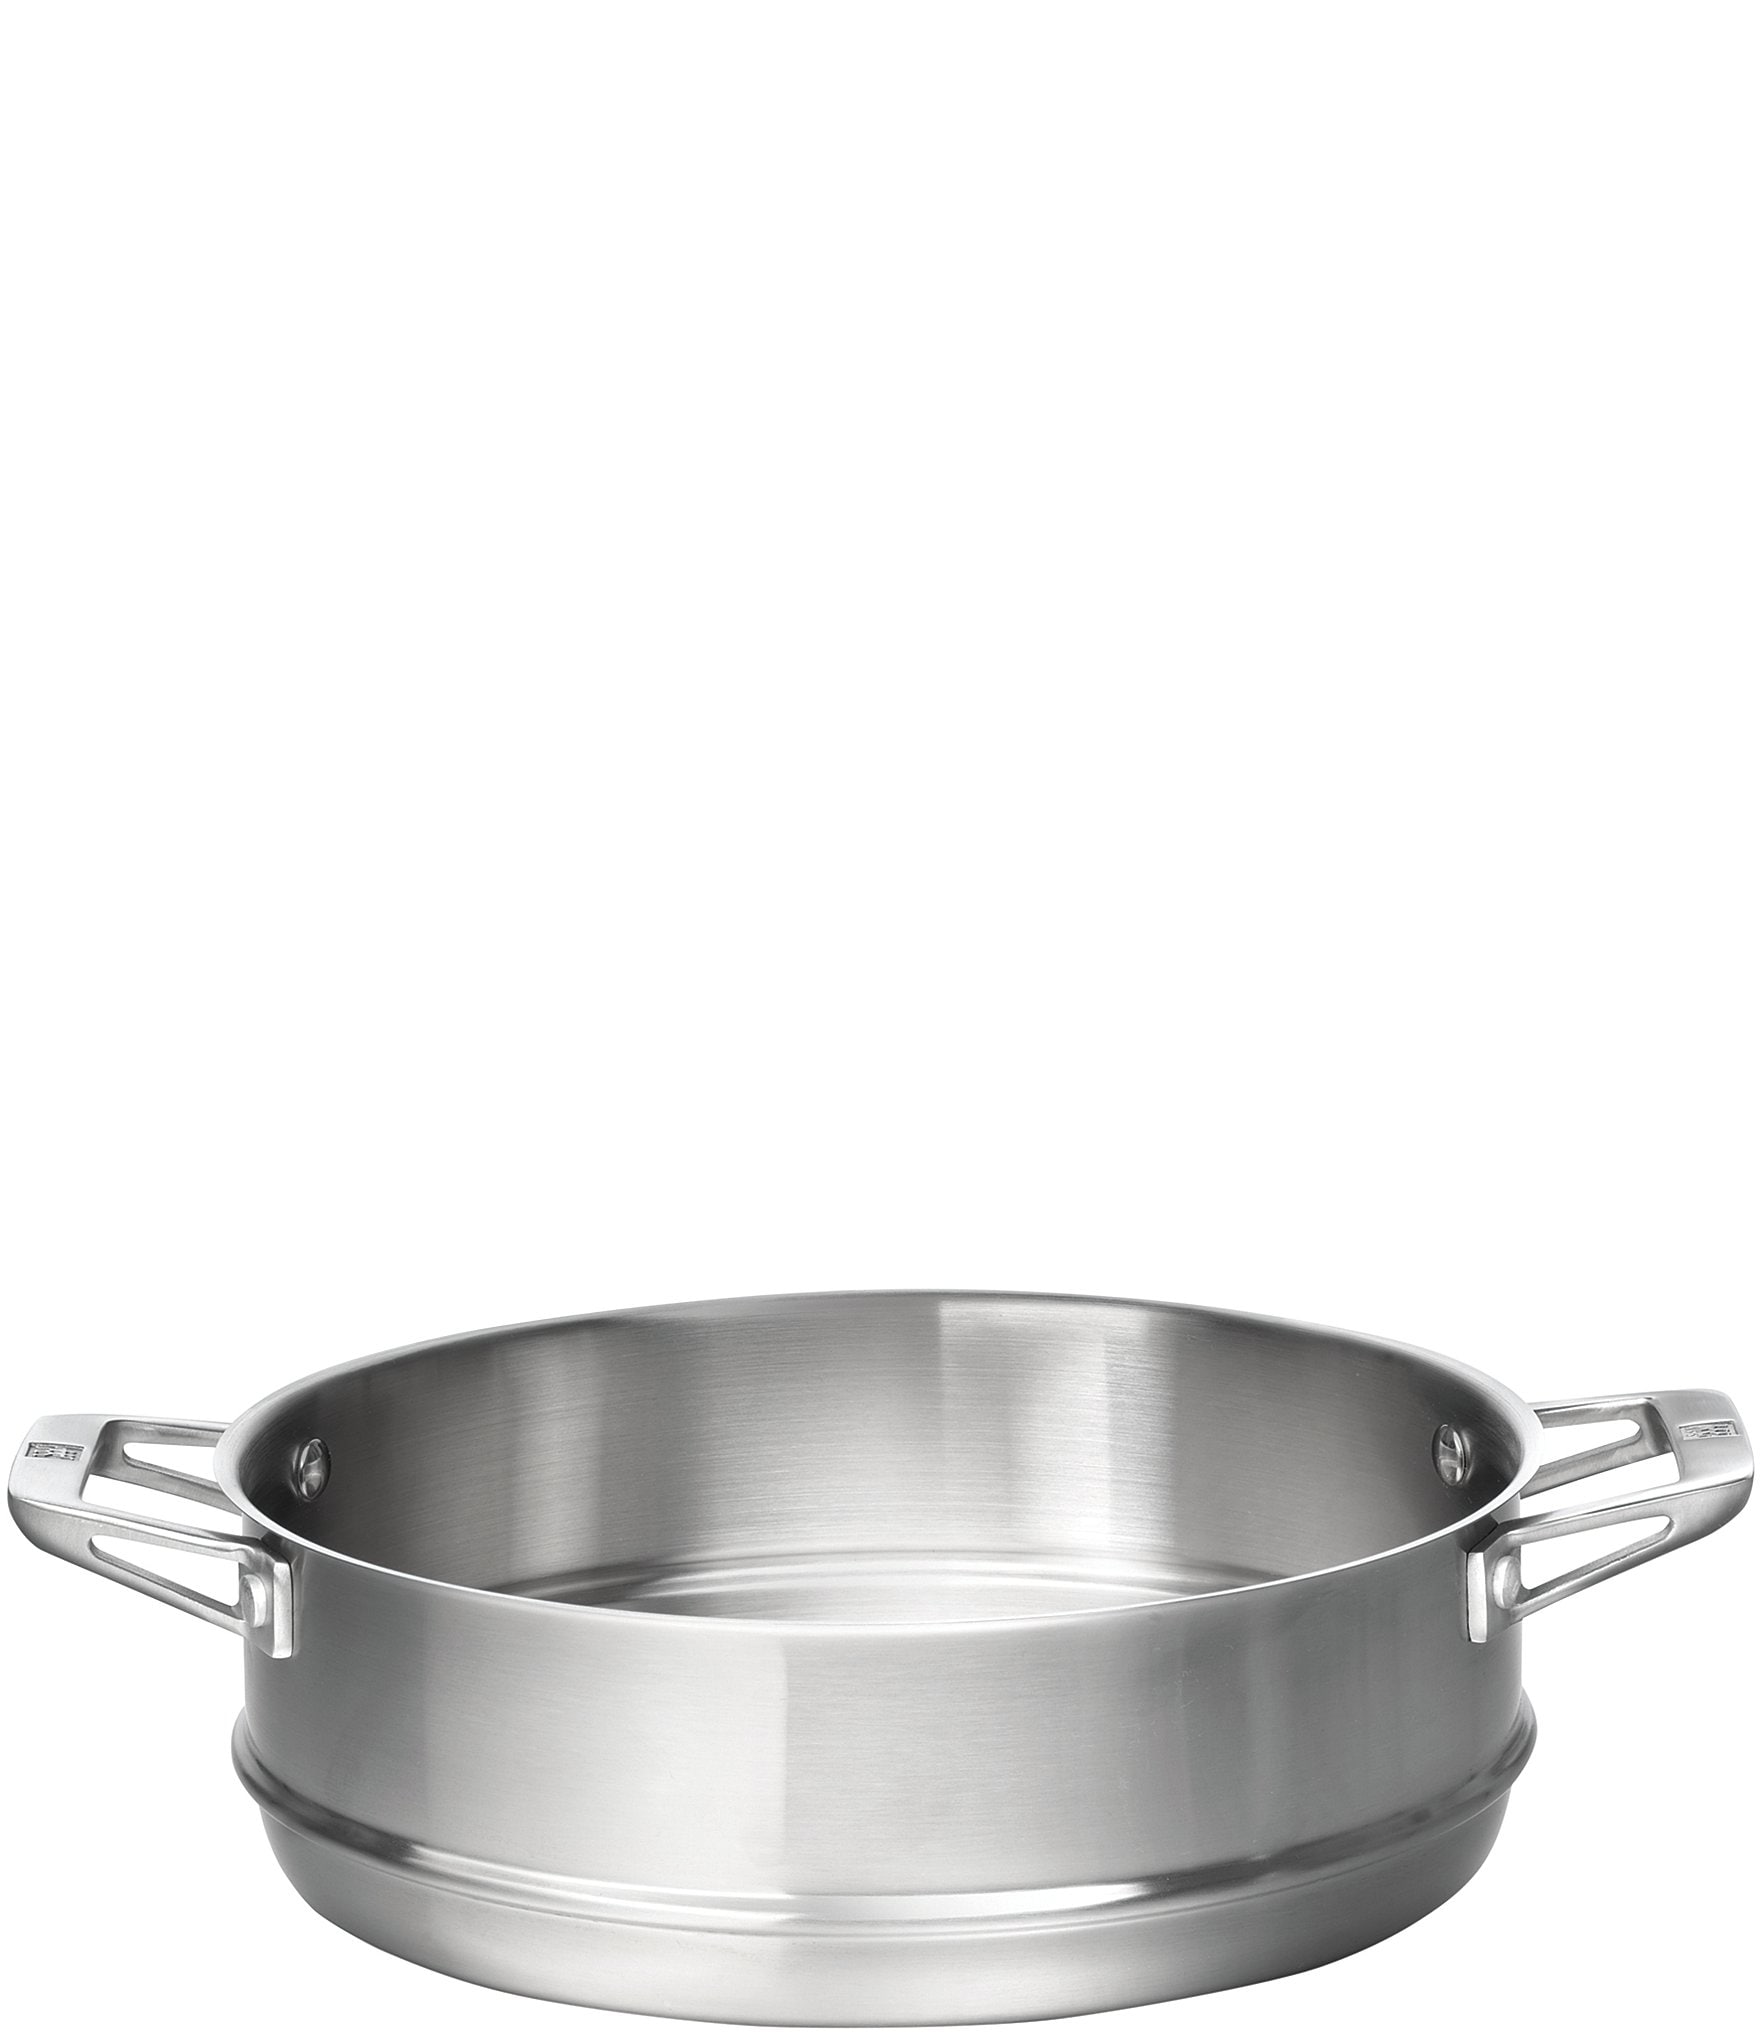 Zwilling ZWILLING Motion Stainless Steel Steamer Insert - Stainless Steel -  5 requests